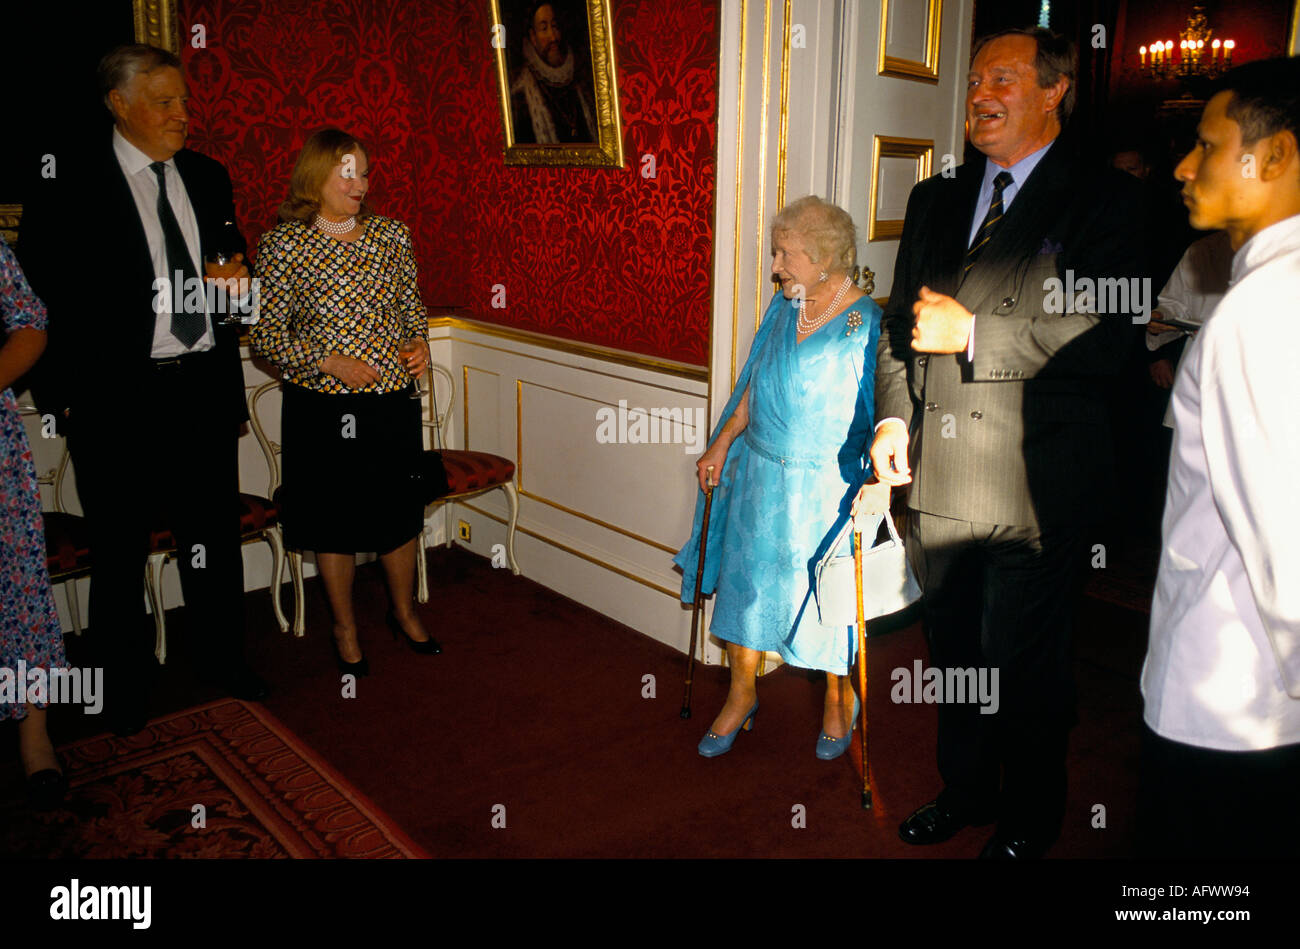 Queen Mother 2001 reception St James's Palace for National Trust for Scotland, working reception meeting greeting quests London Uk 2000s HOMER SYKES Stock Photo